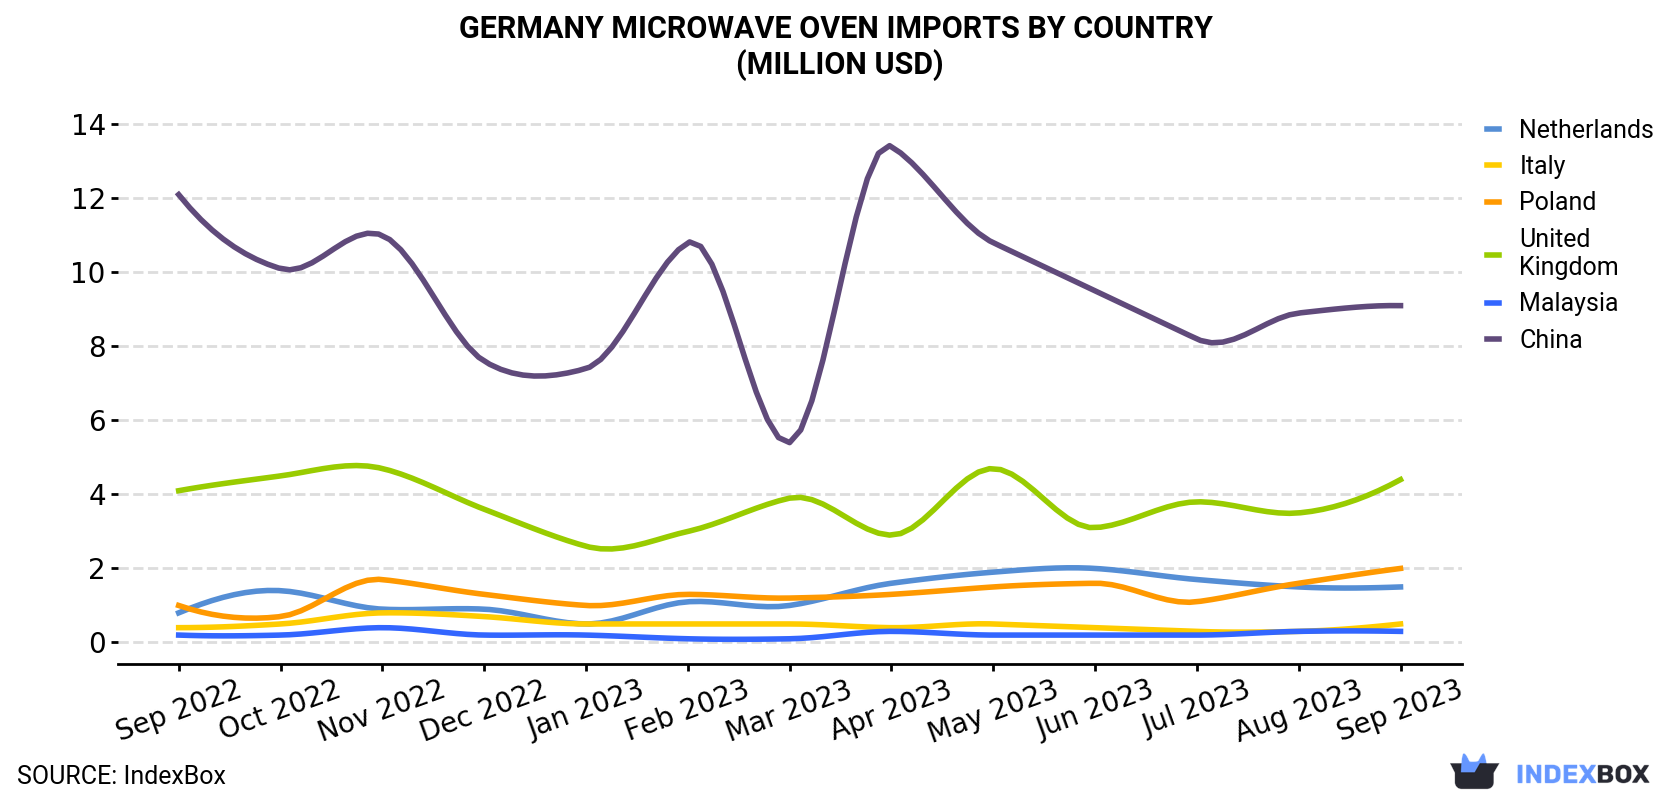 Germany Microwave Oven Imports By Country (Million USD)